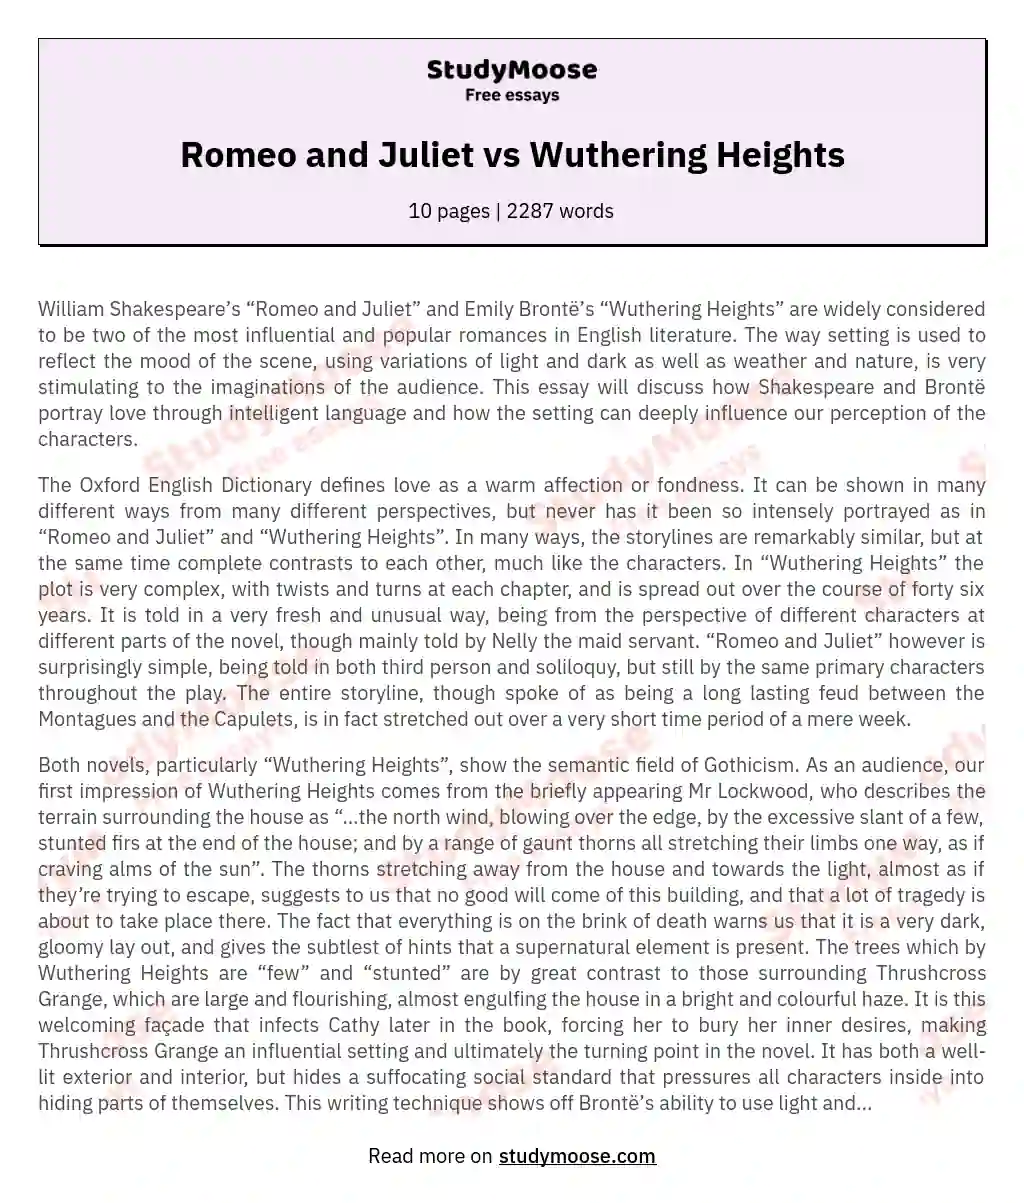 Romeo and Juliet vs Wuthering Heights